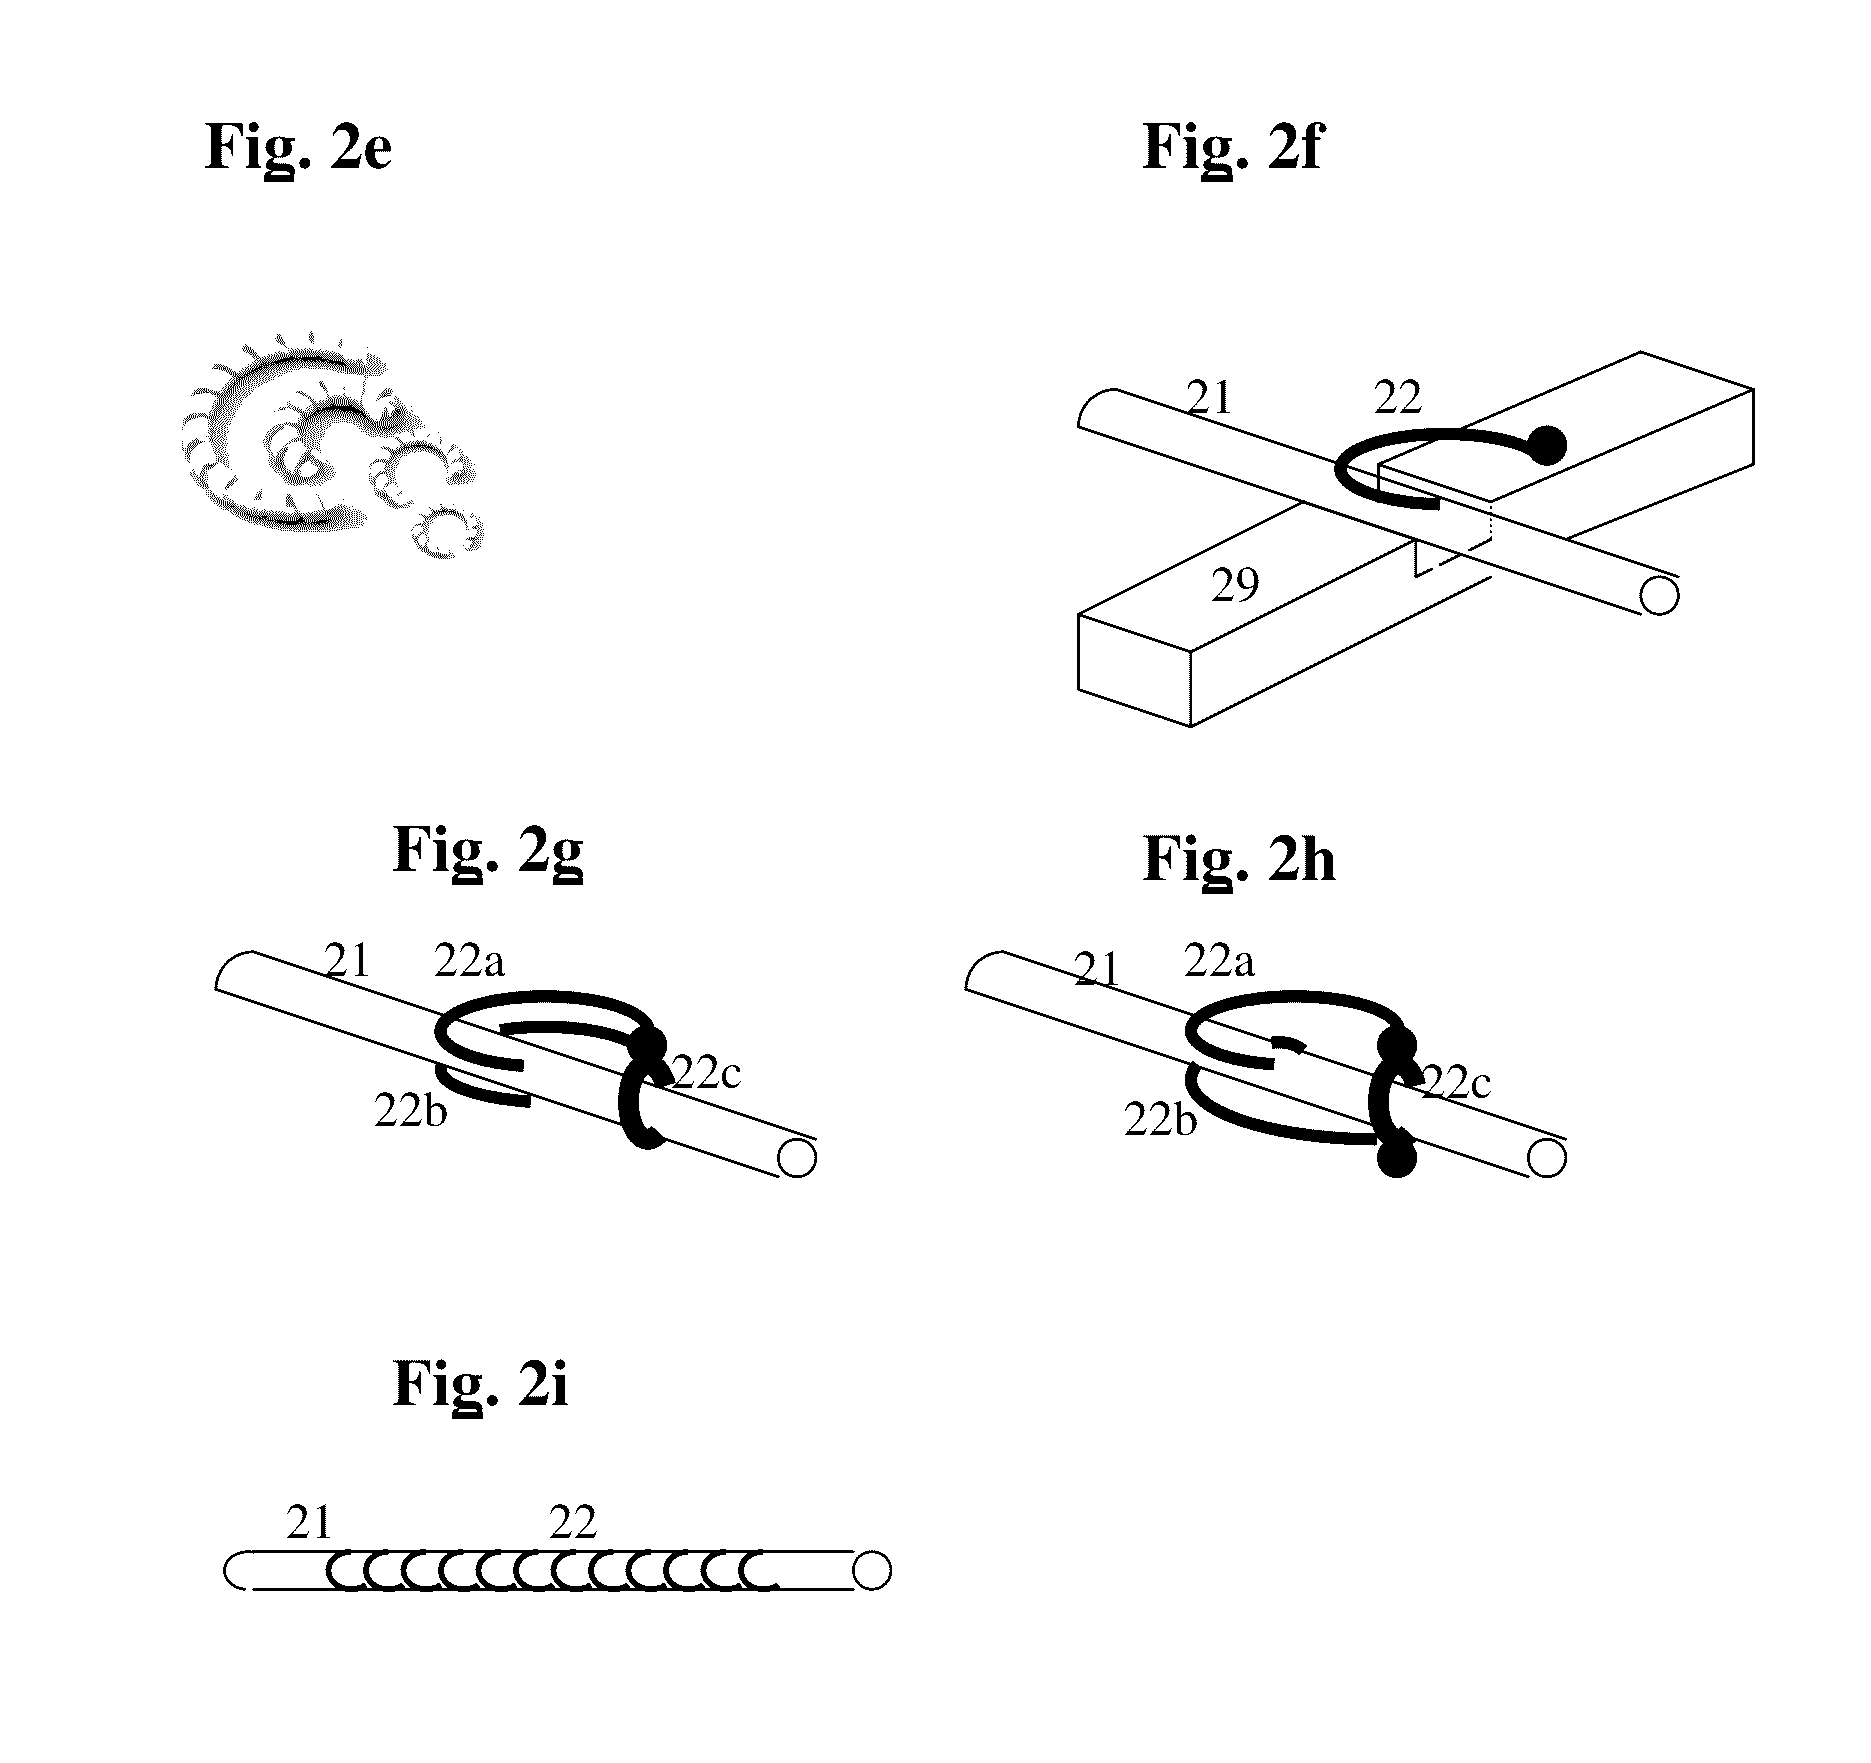 System and method for more efficient automatic irrigation based on a large number of cheap humidity sensors and automatic faucets